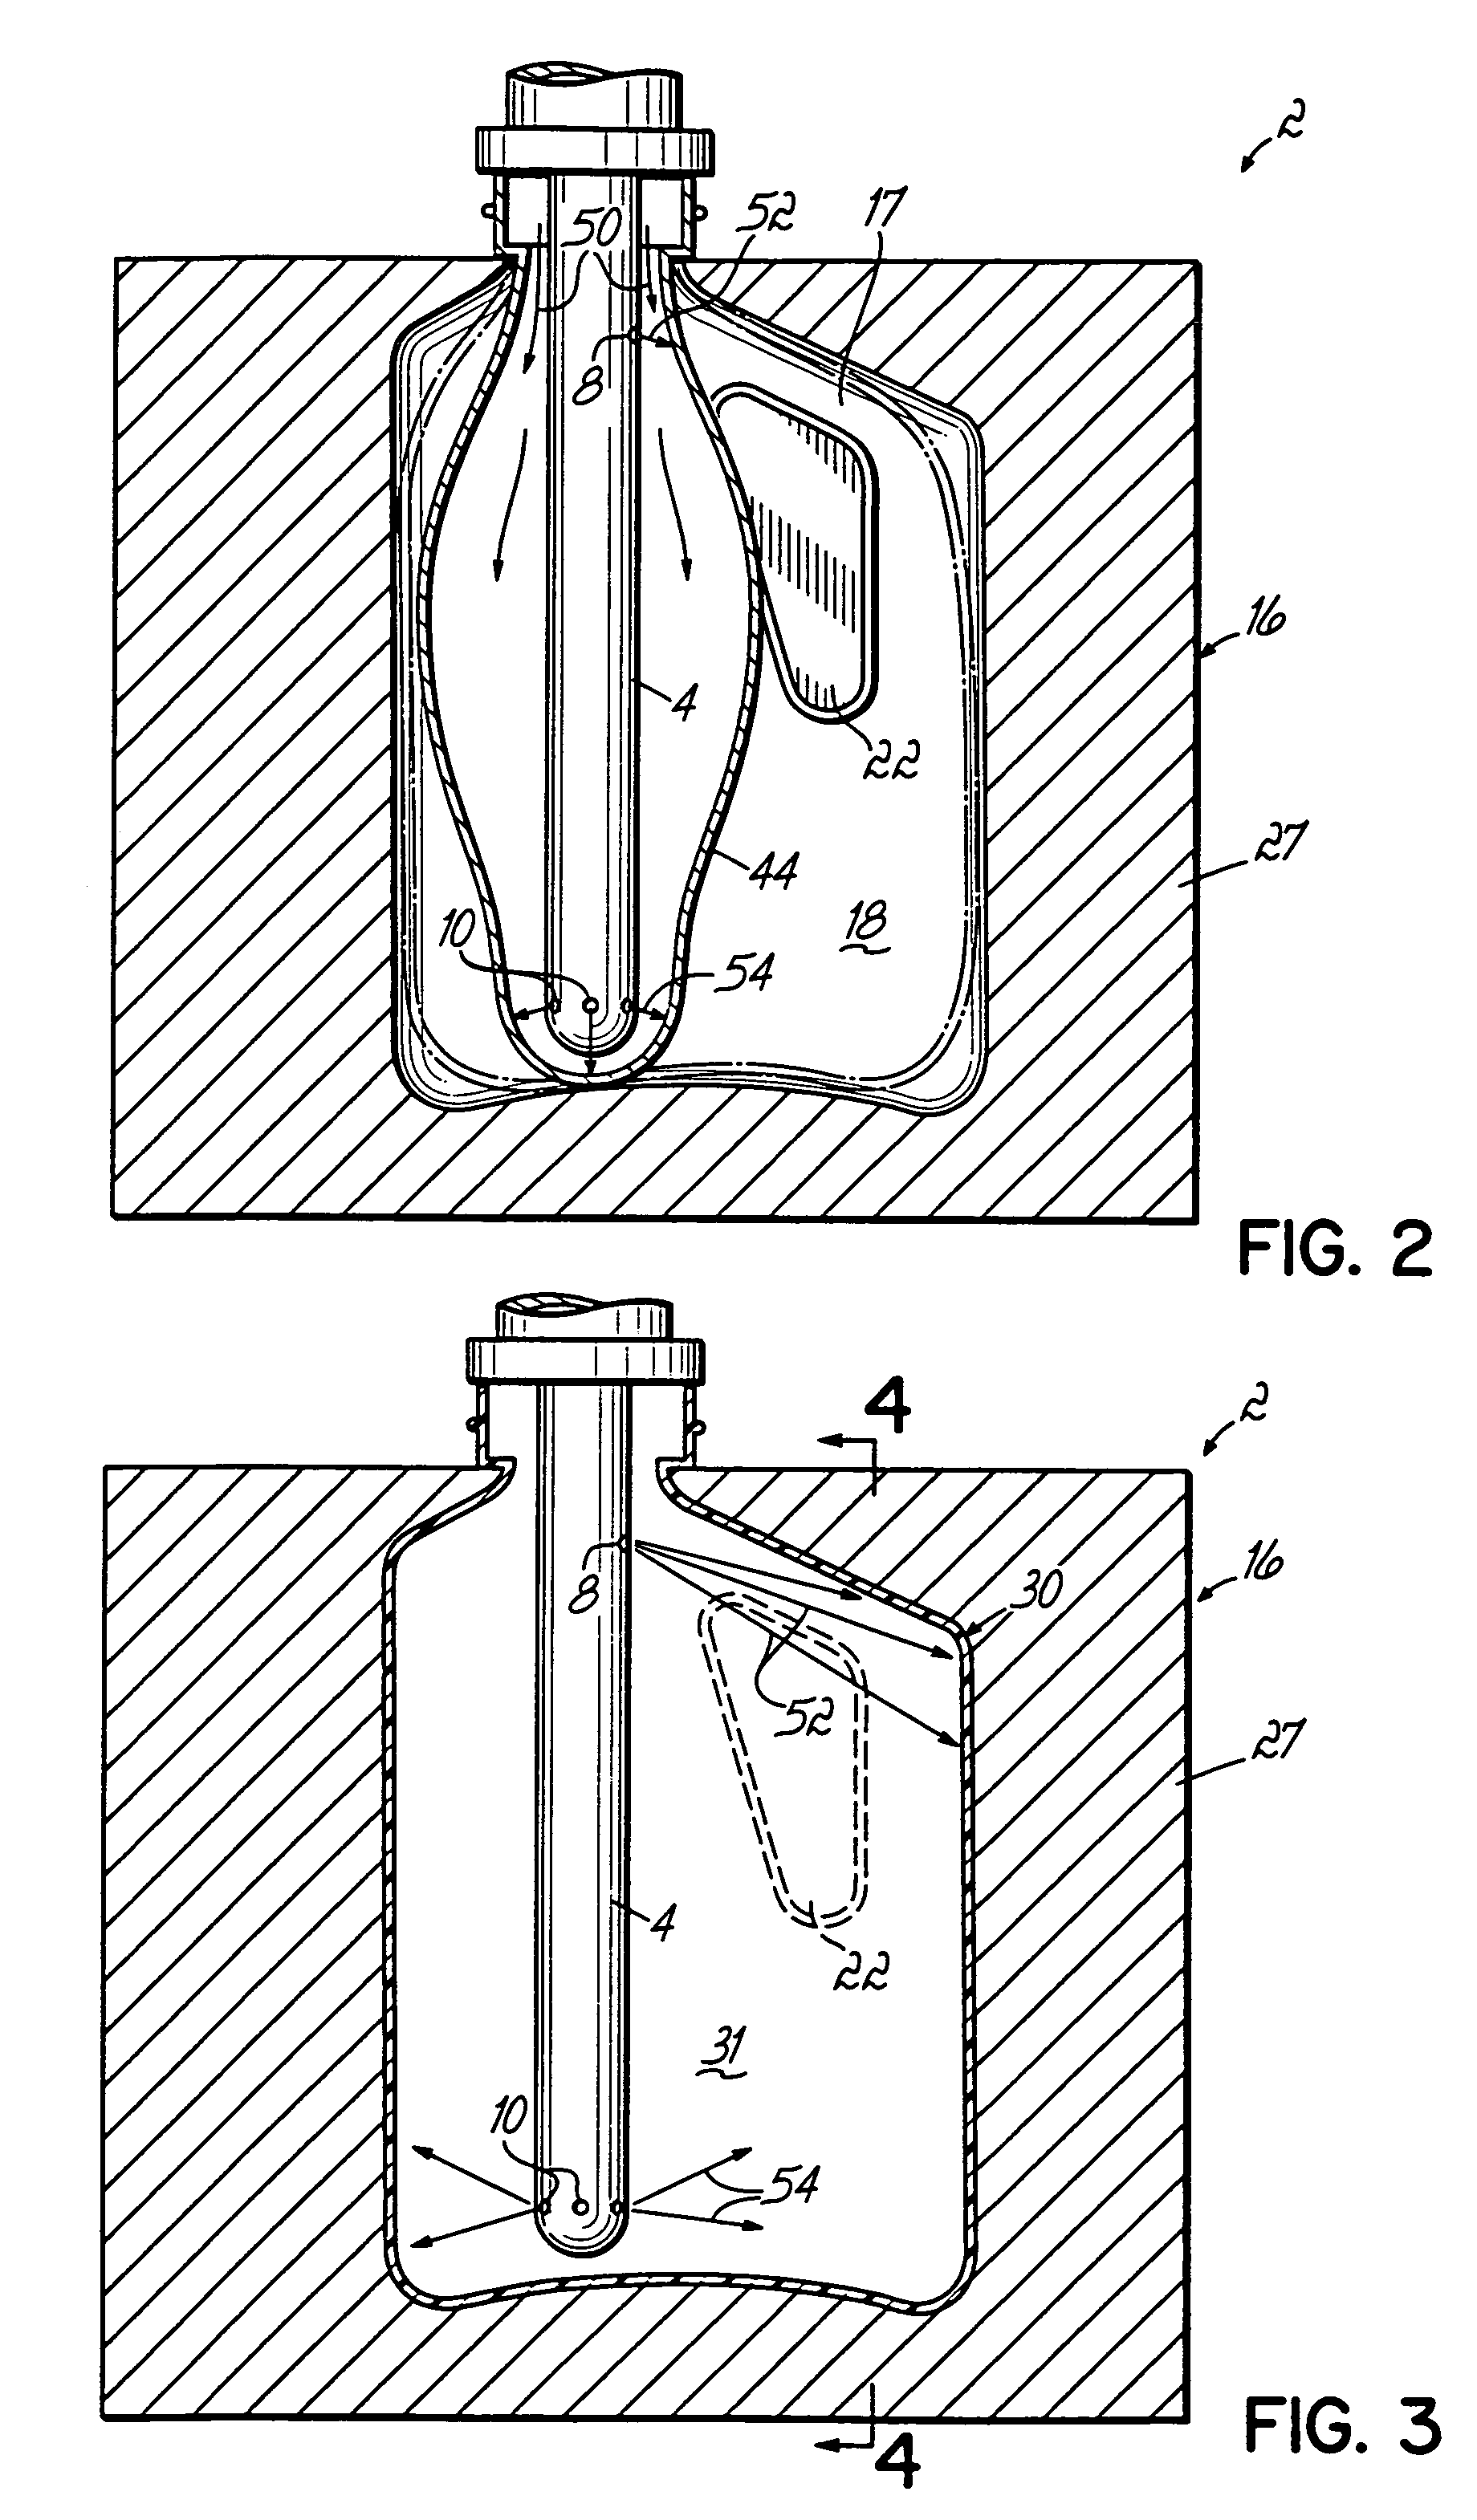 Method of making a stretch/blow molded article (bottle) with an integral projection such as a handle